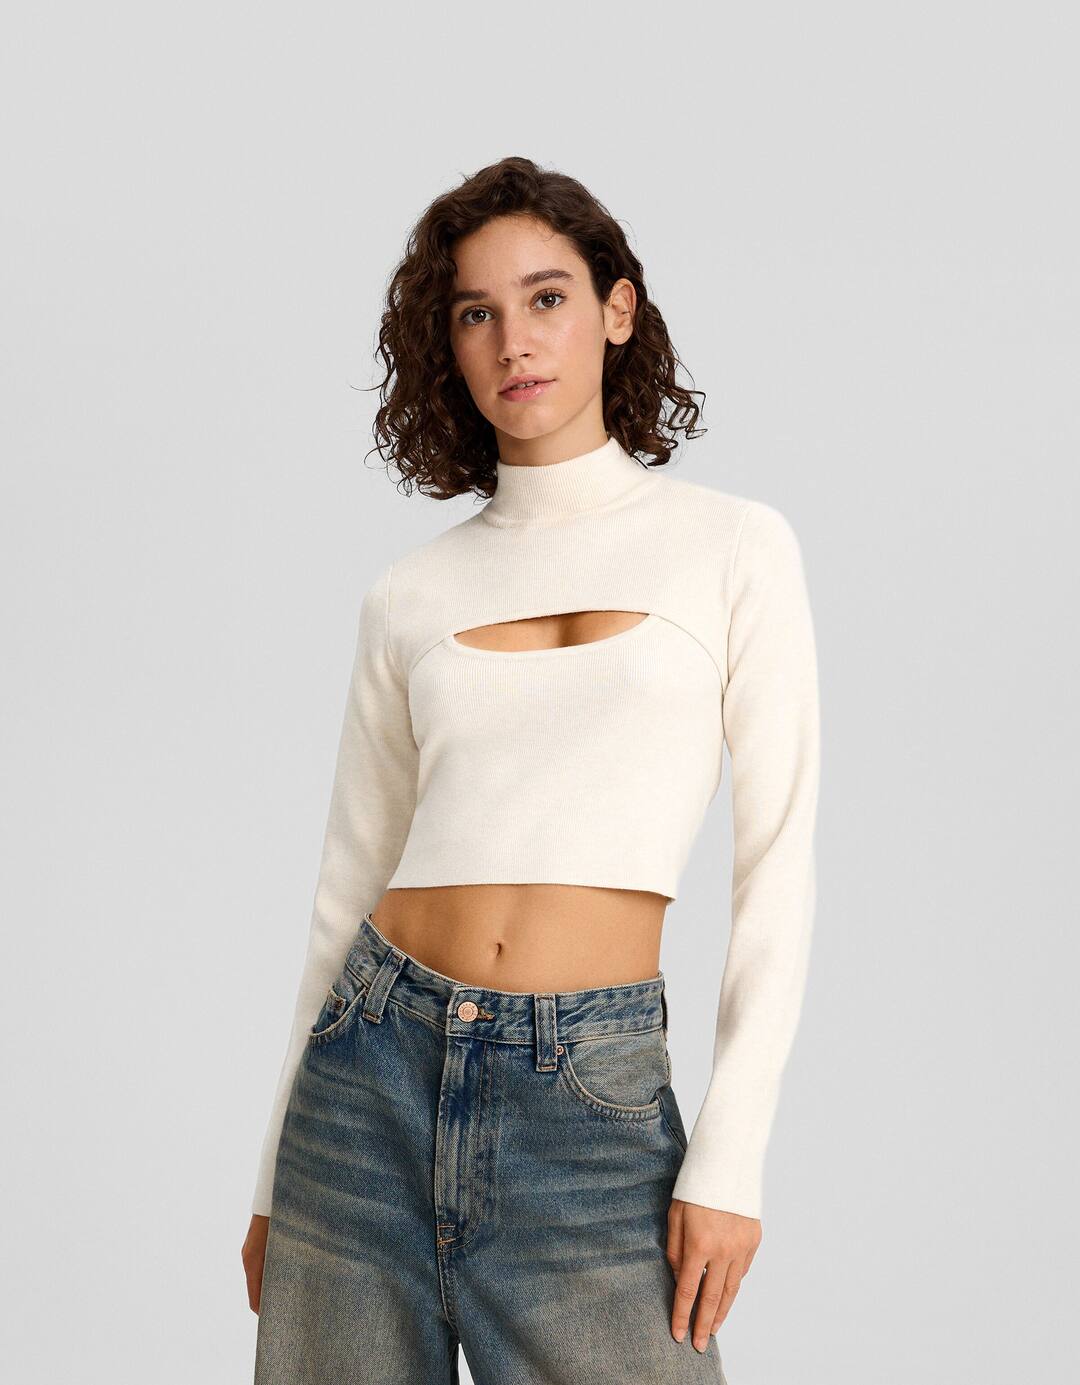 Cropped arm warmer sweater with a high neck